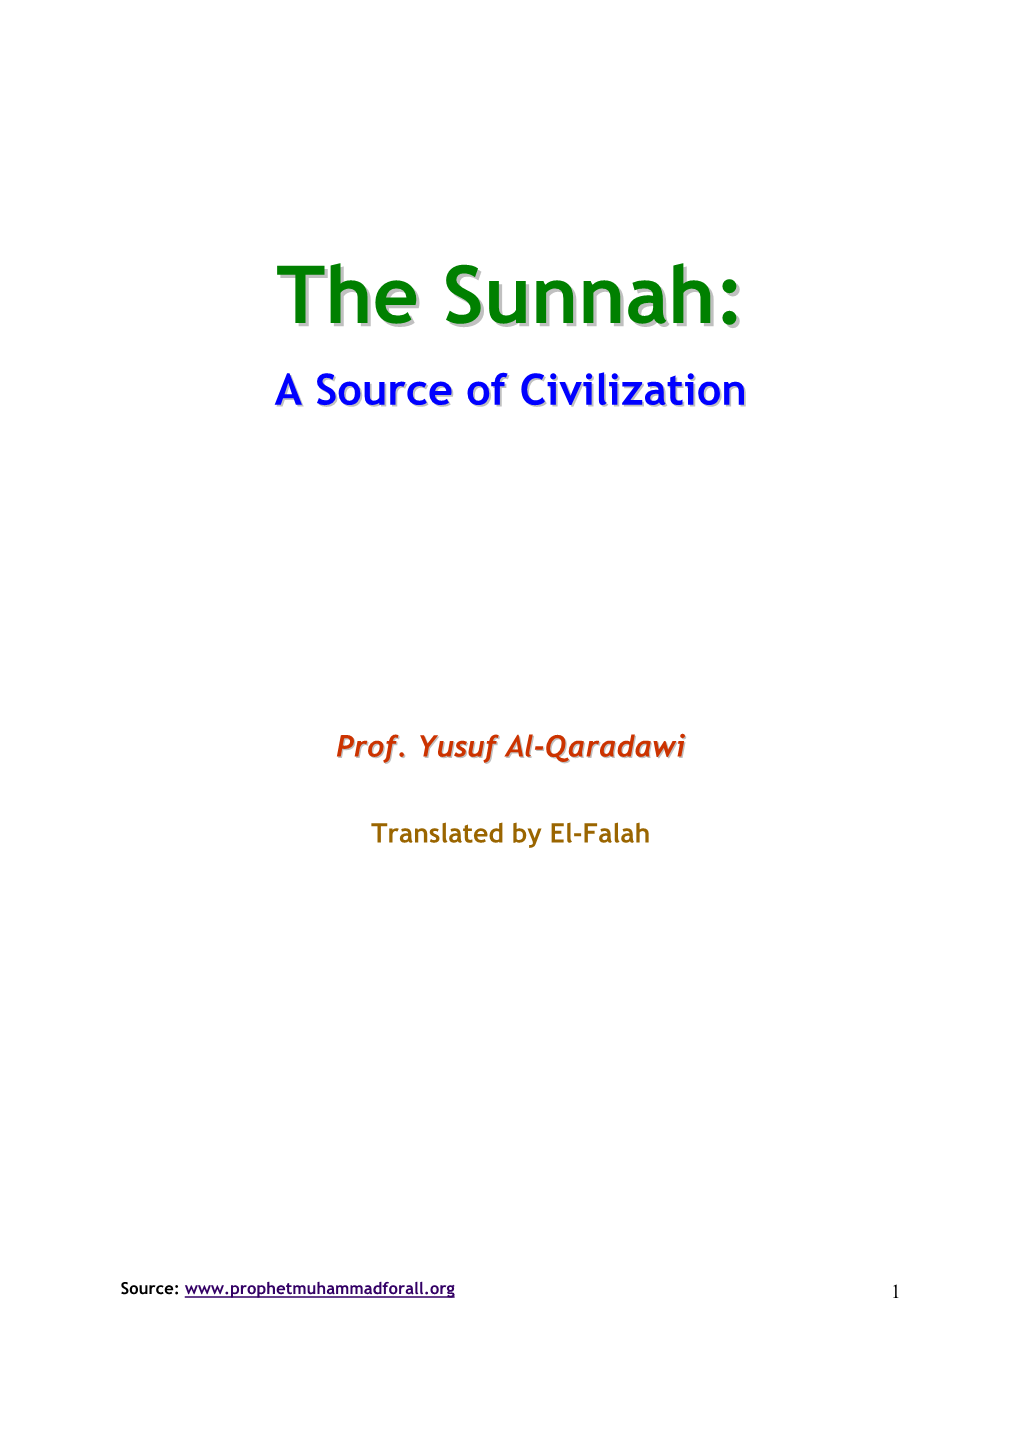 The Sunnah: a Source of Civilization the Sunnah and Civilized Fiqh 1